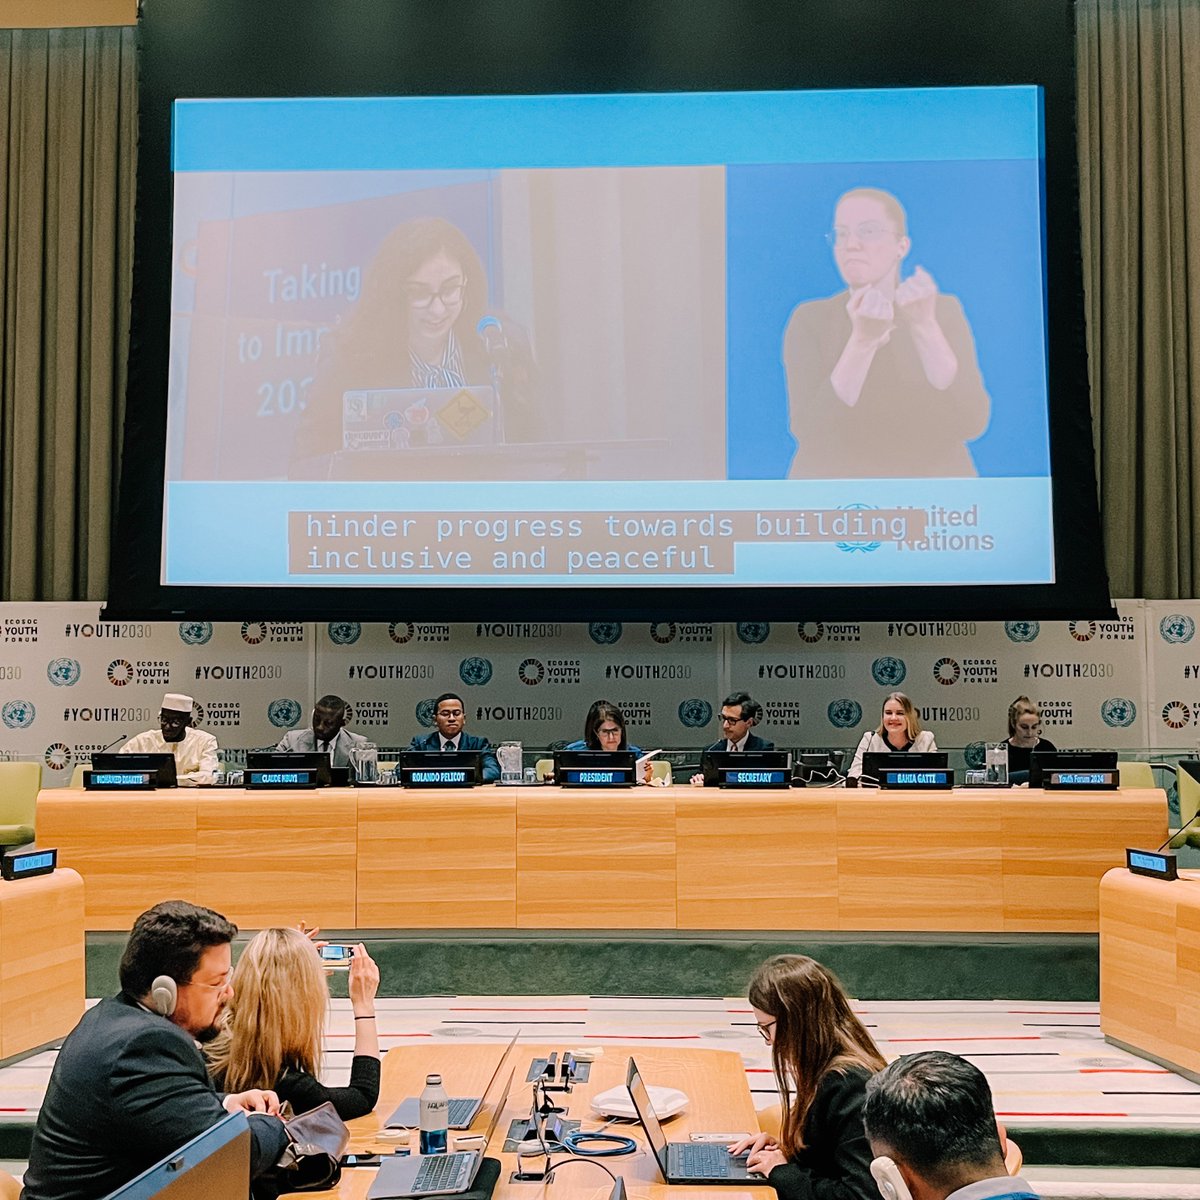 🌎🤝🇺🇳 Focused on #SDG16, the session highlighted the meaningful contribution of young people in shaping sustainable solutions amid the current volatile global landscape. The discussion underscored #youth's vital role in promoting peace, justice & human rights. #Youth2030